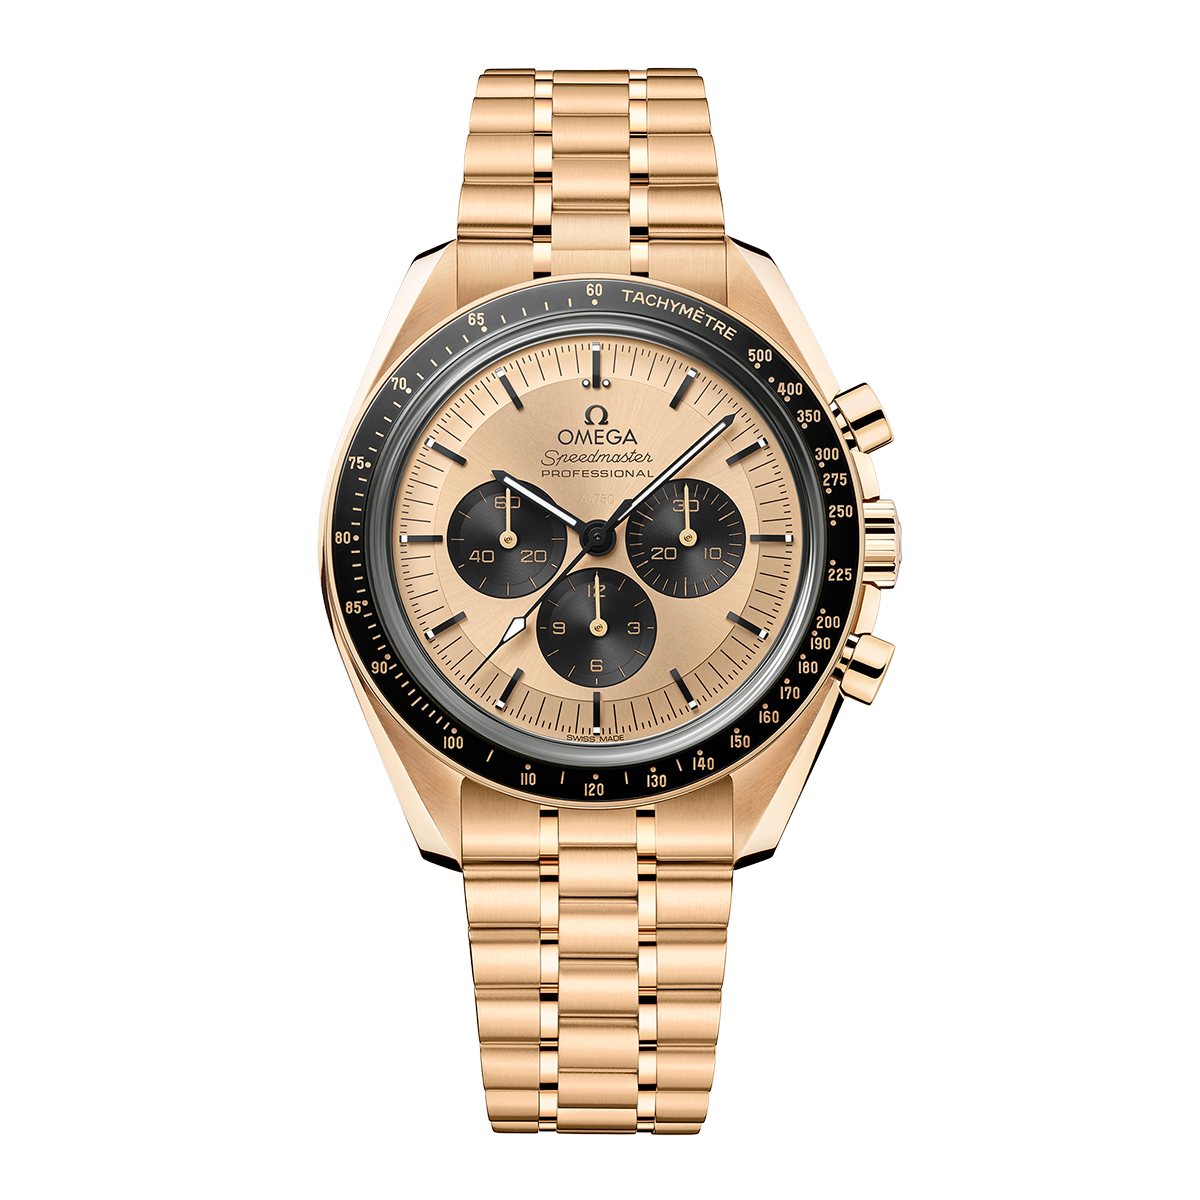 Speedmaster Moonwatch Professional Co-Axial Master Chronometer Chronograph 42 mm